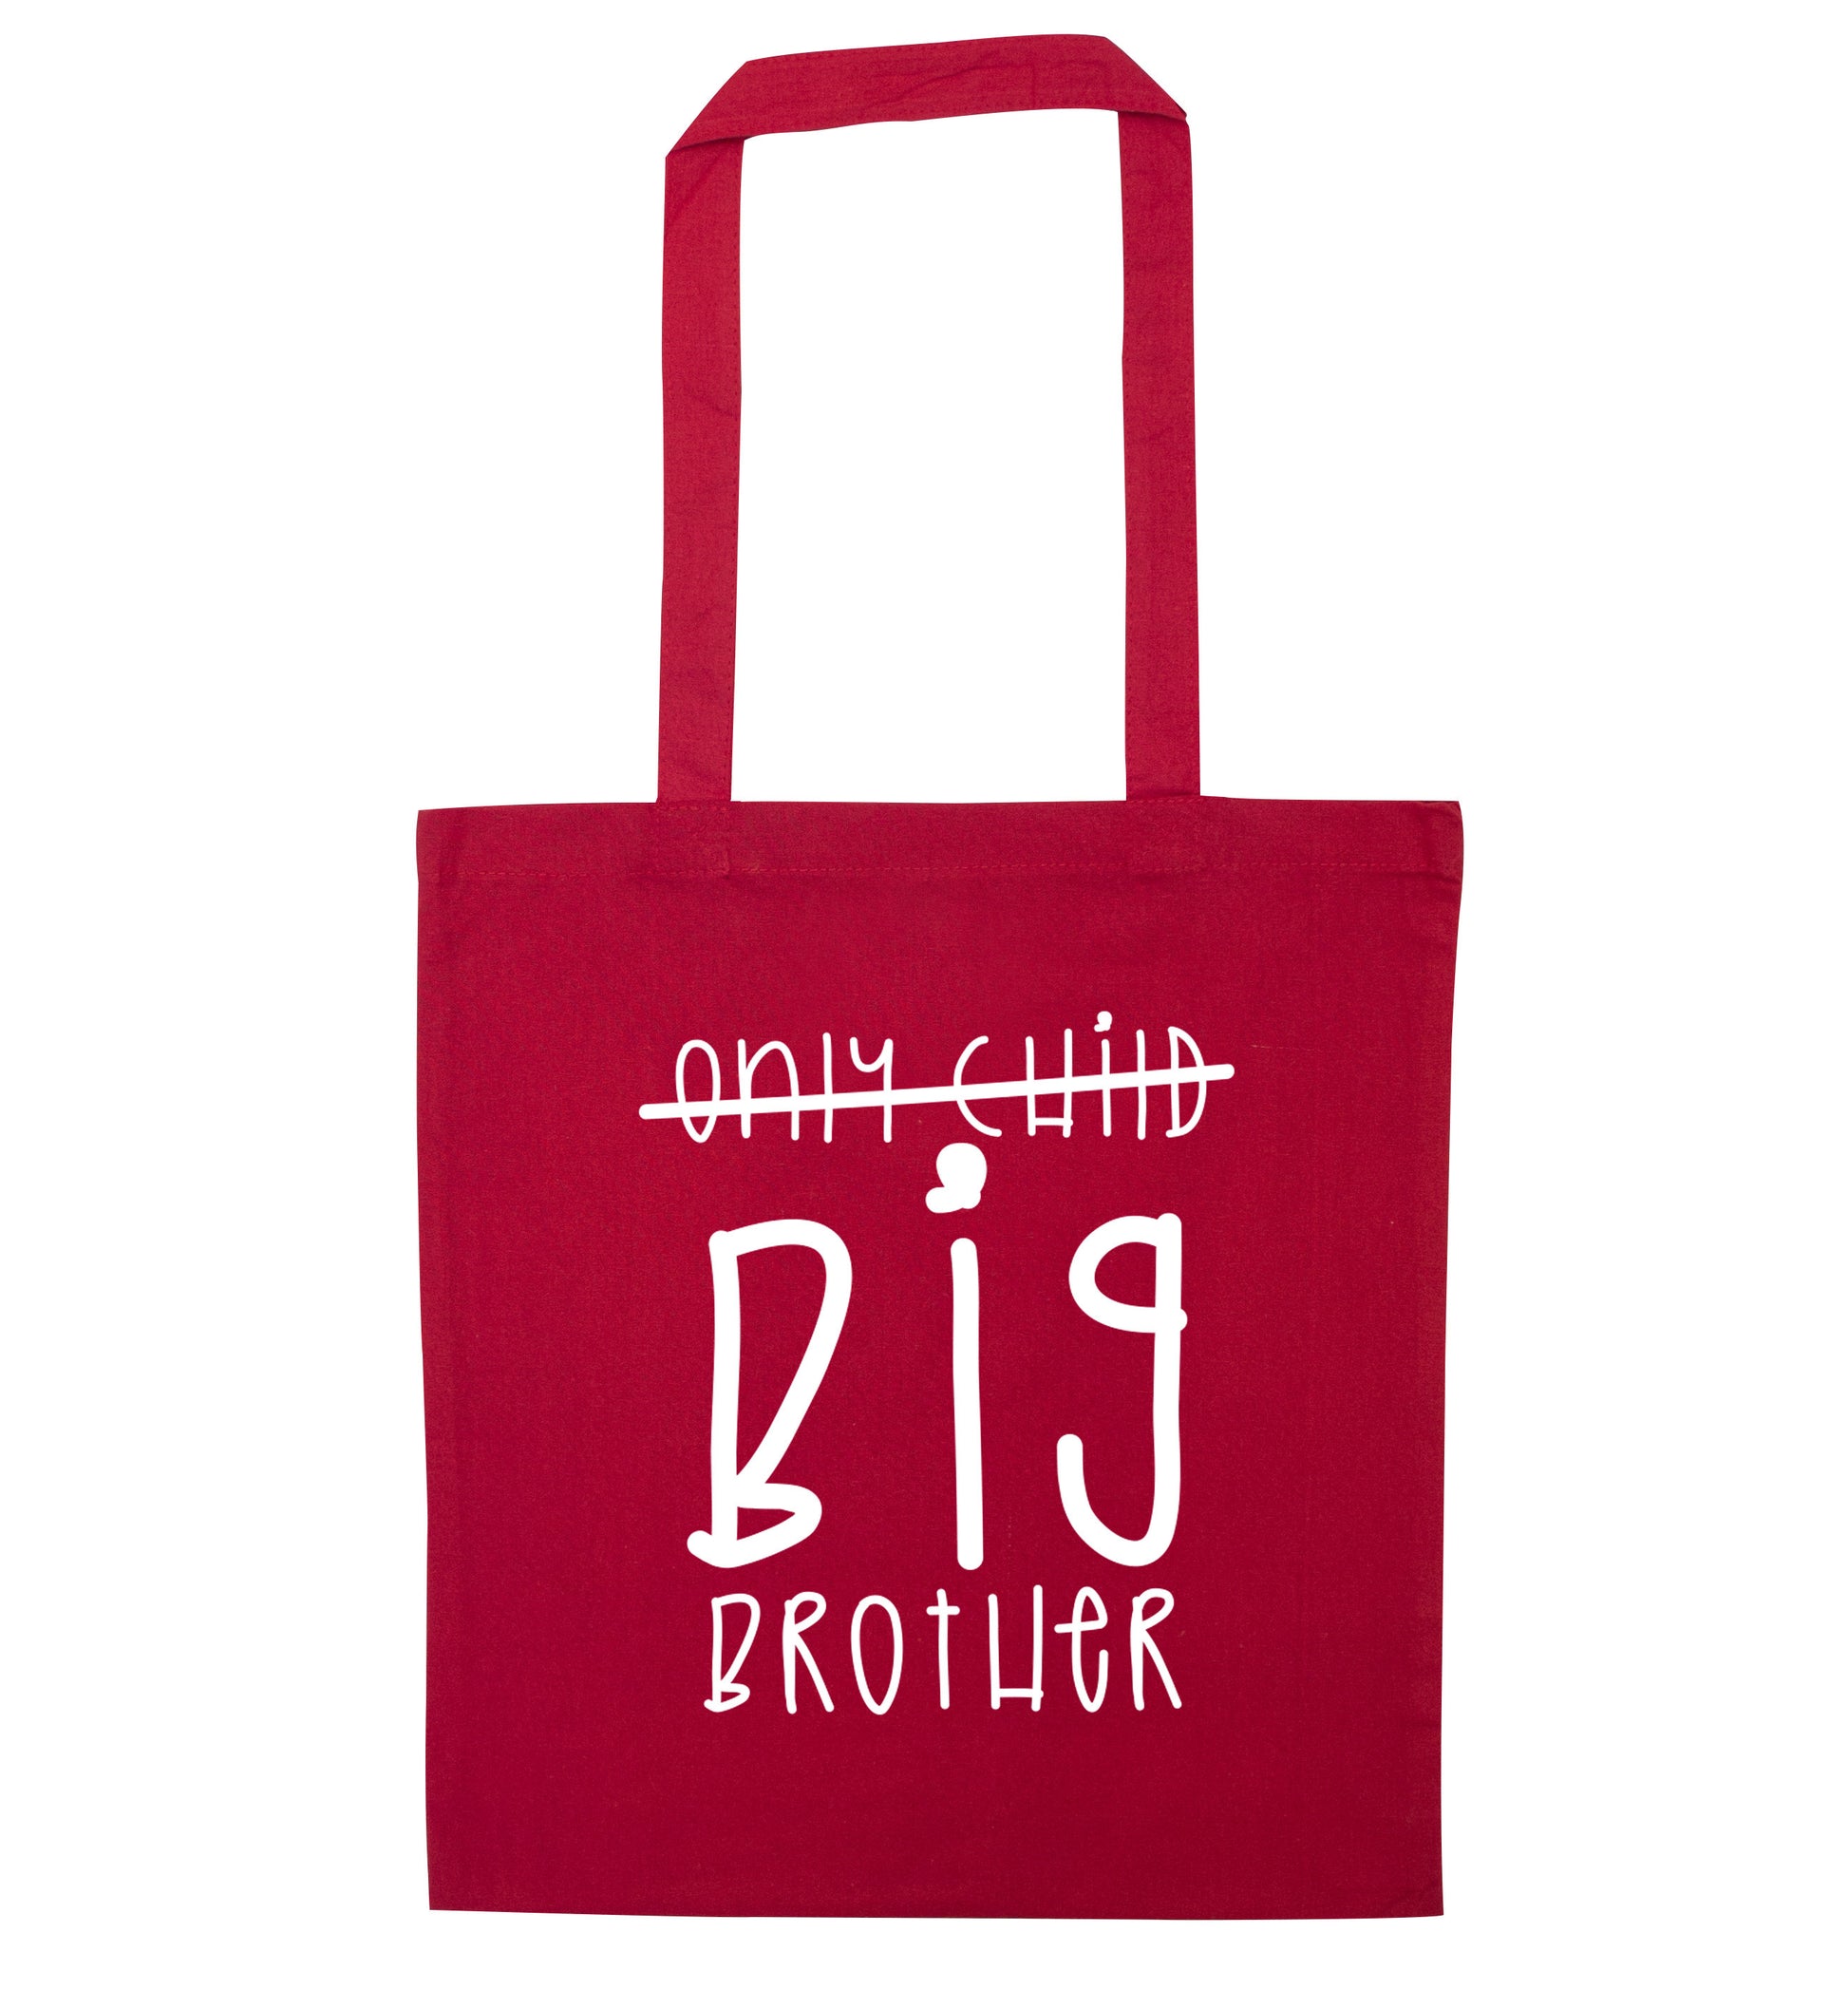 Only child big brother red tote bag